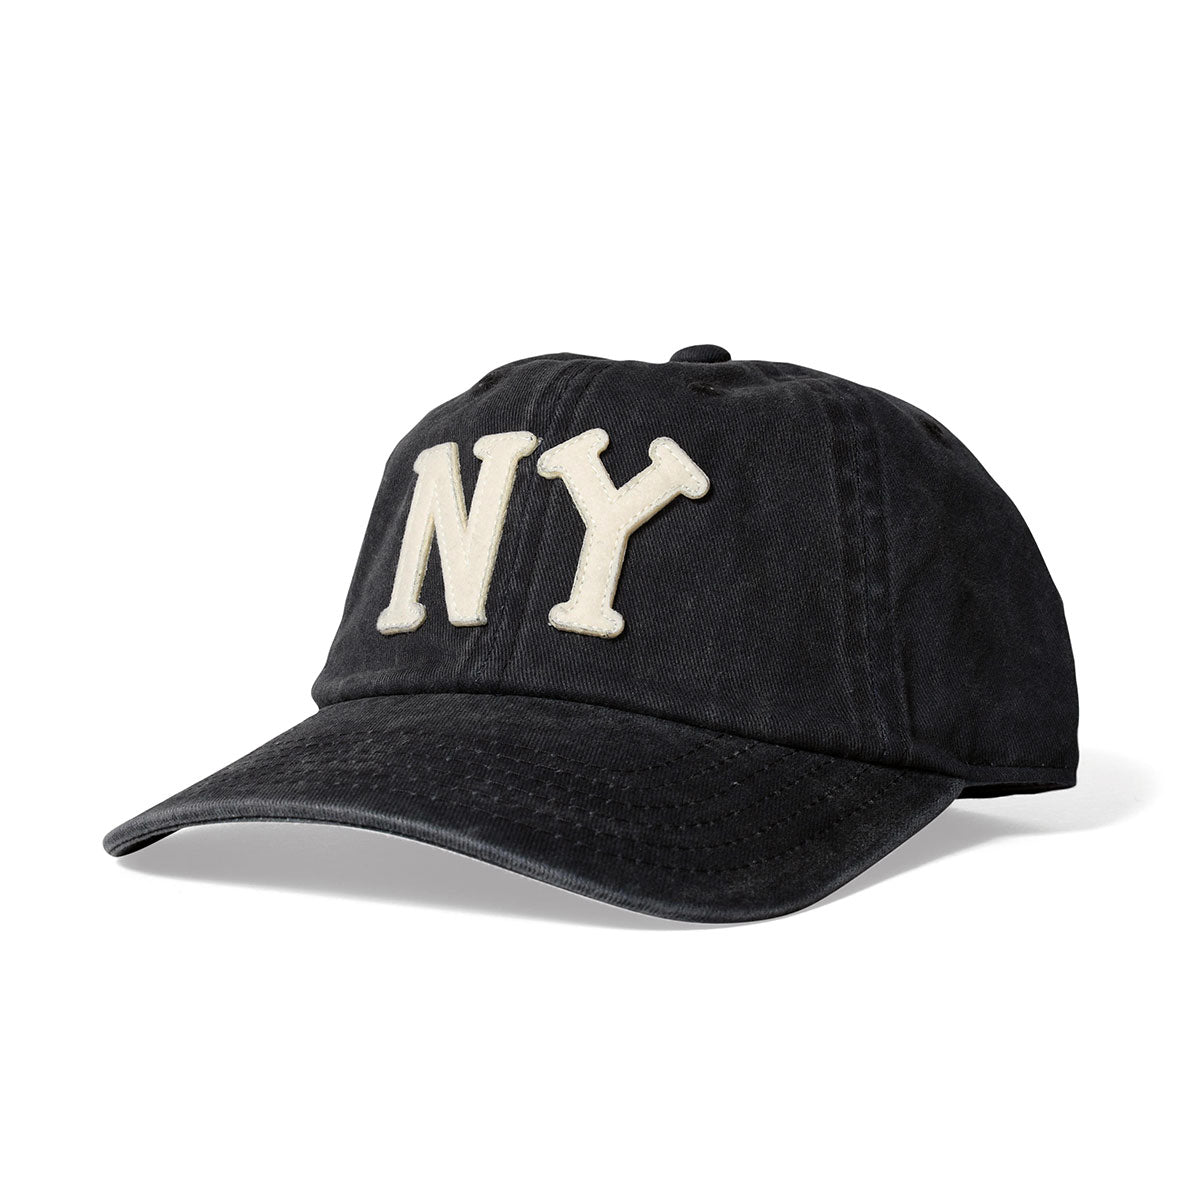 AMERICAN NEEDLE 44747BNBY Archive - NY Black Yankees【44747BNBY】